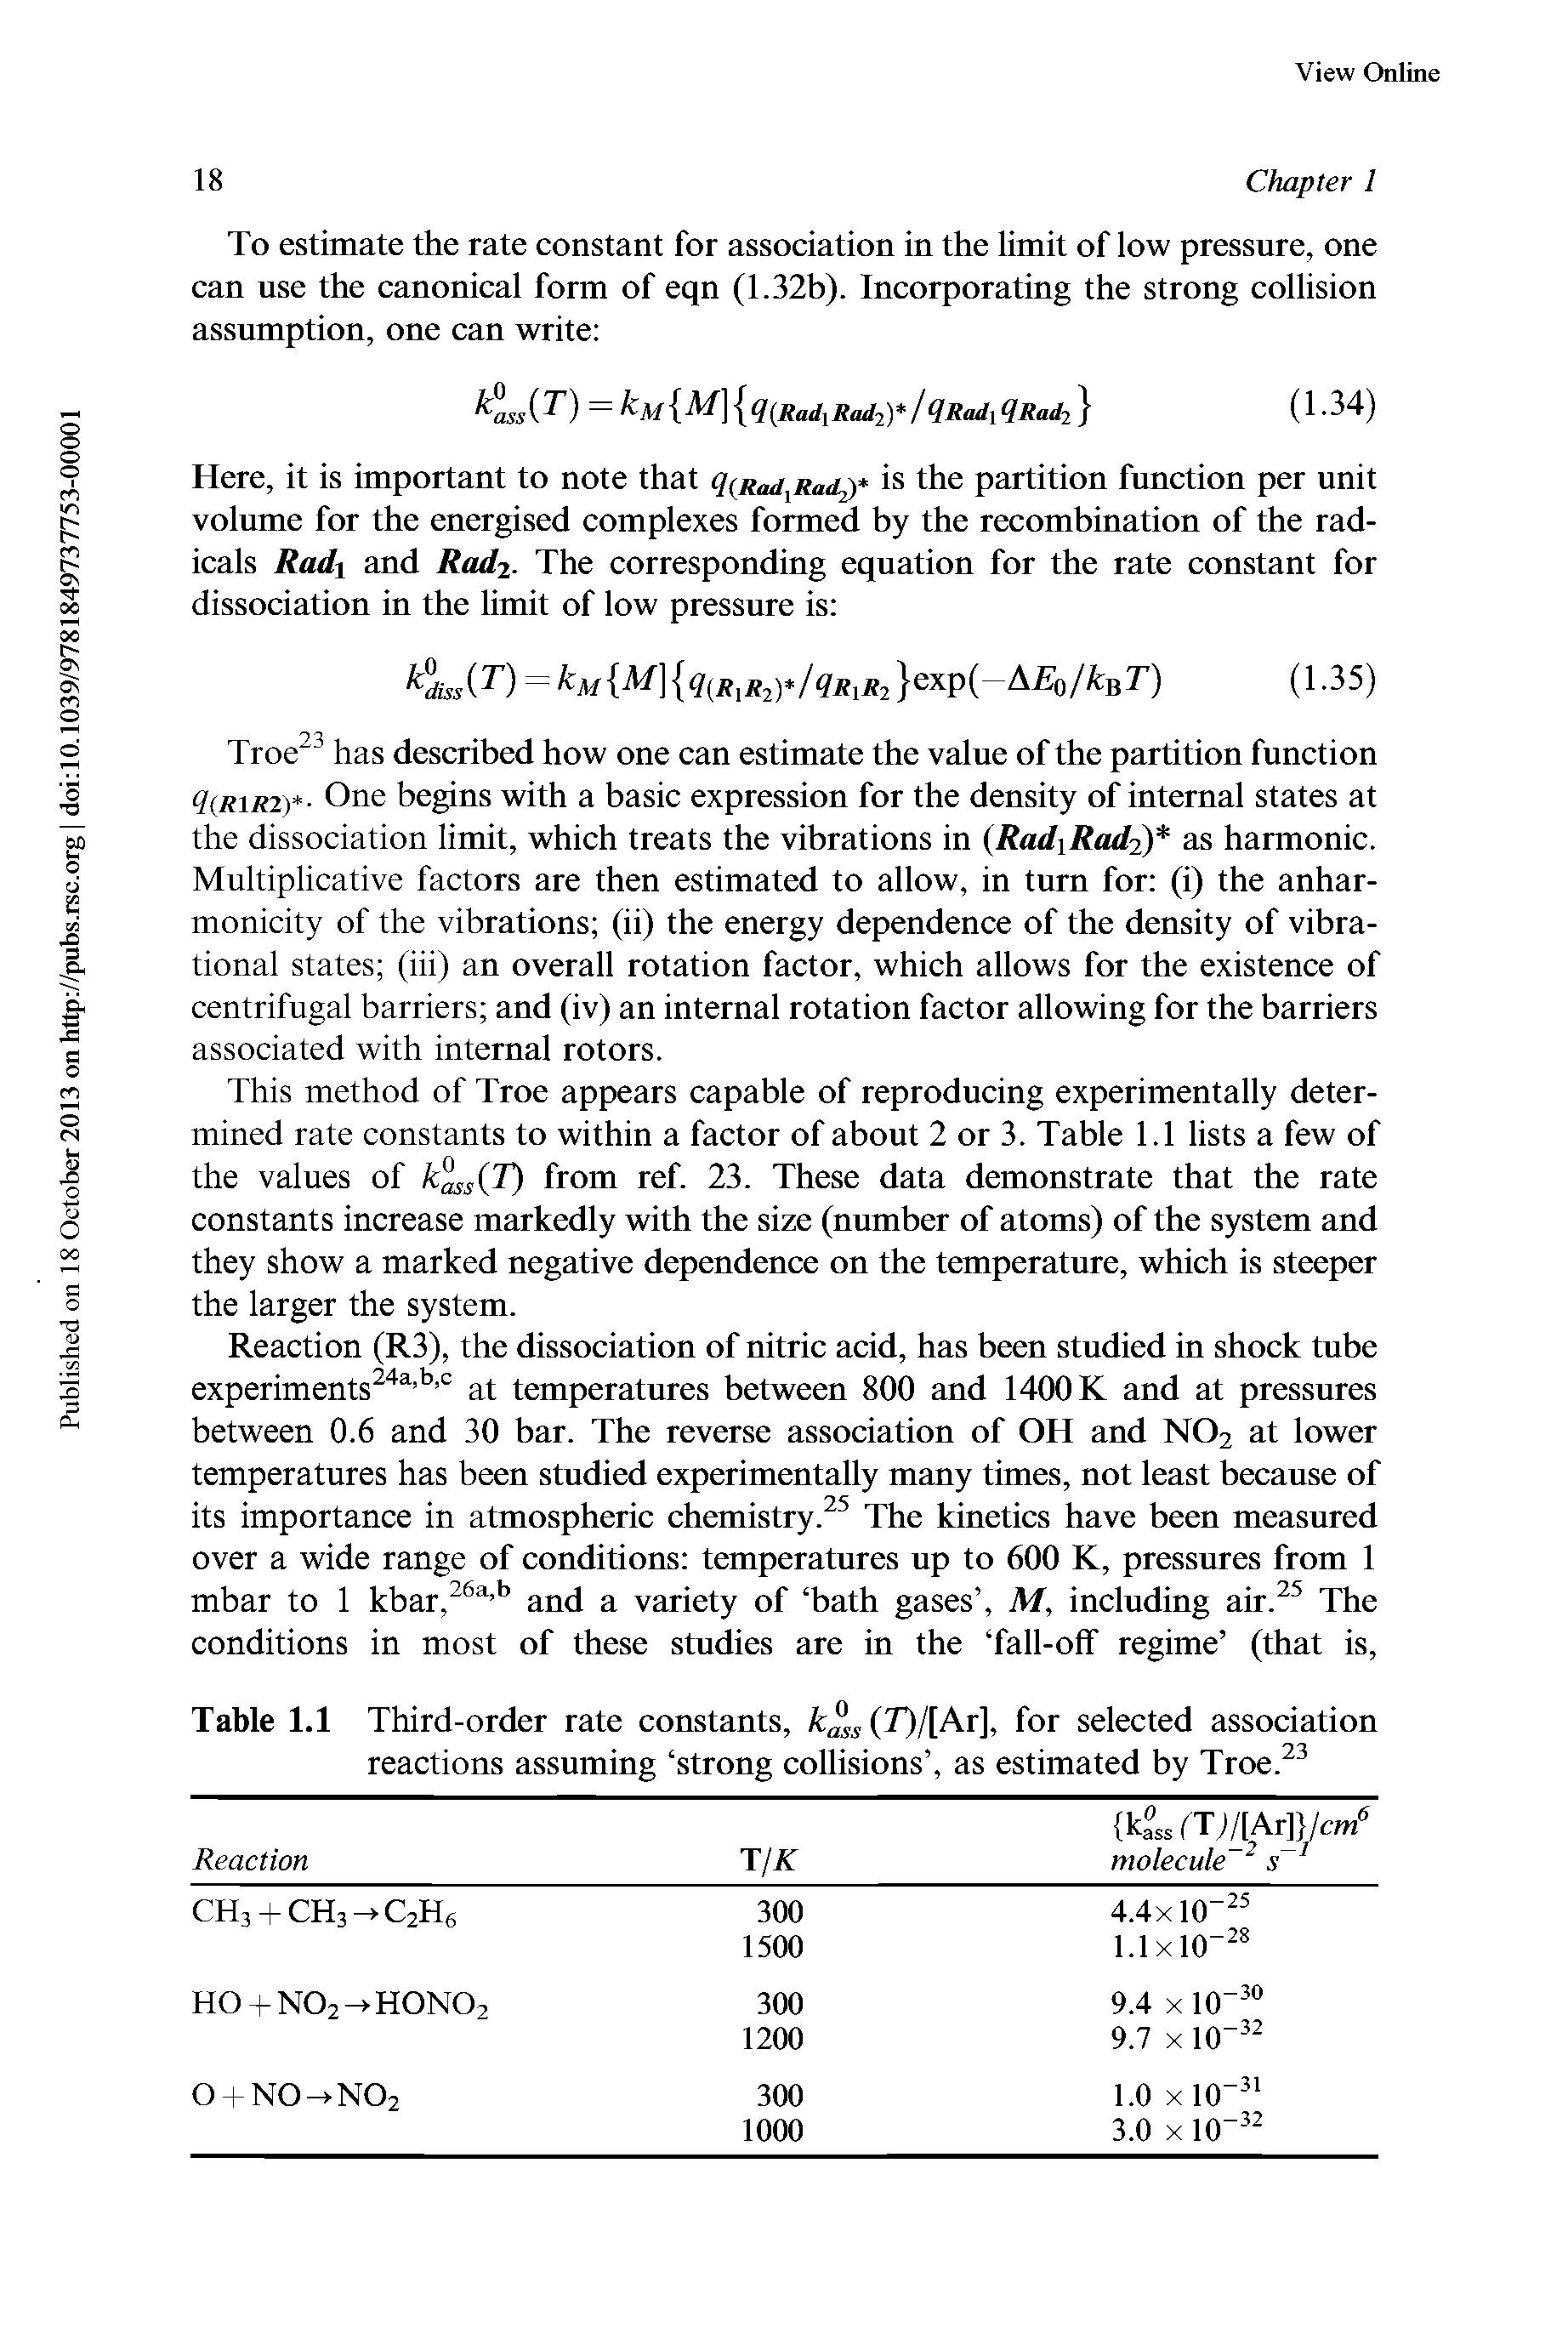 Table 1.1 Third-order rate constants, (7)/[Ar], for selected assodation reactions assuming strong collisions , as estimated by Troe. ...